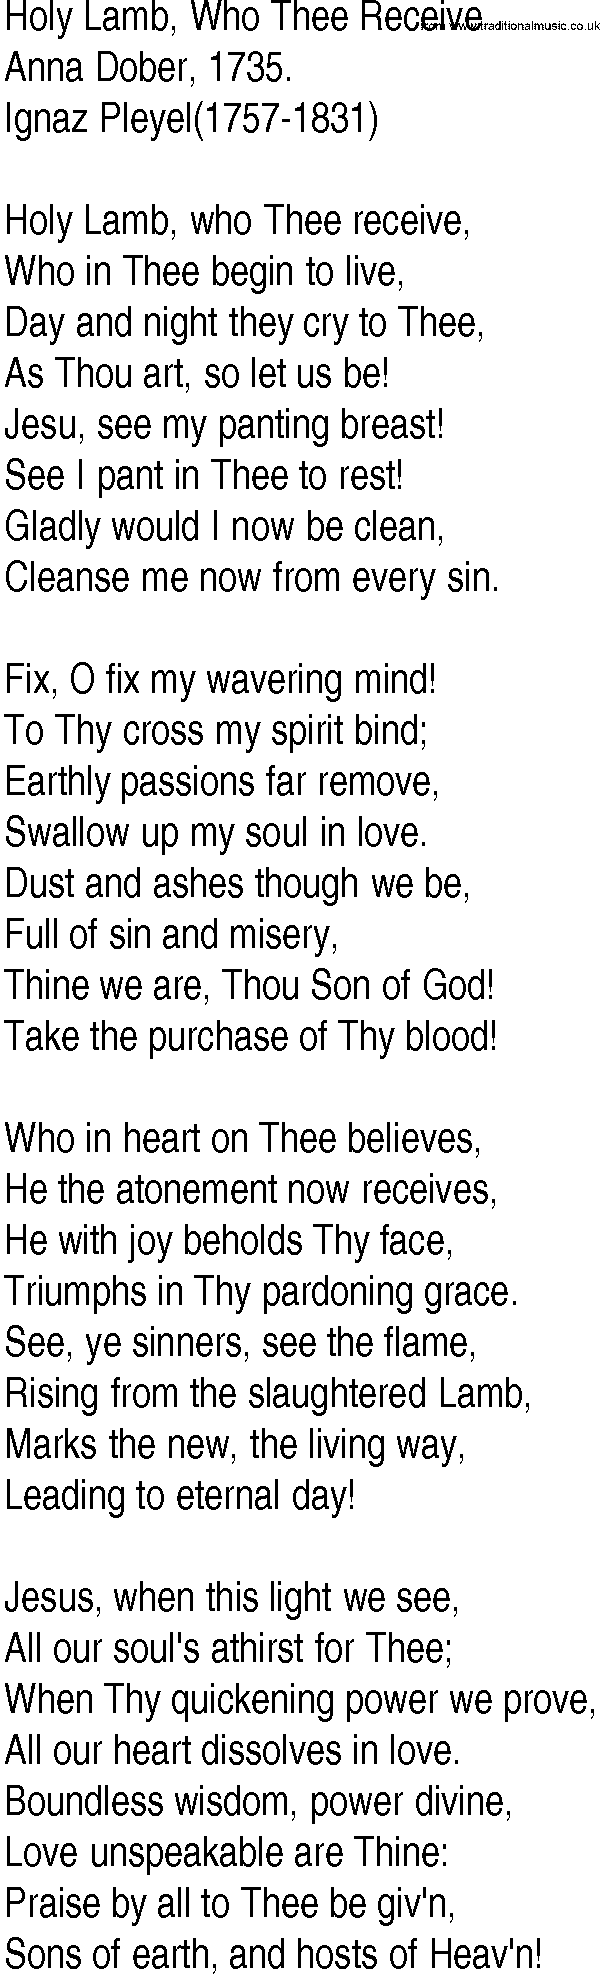 Hymn and Gospel Song: Holy Lamb, Who Thee Receive by Anna Dober lyrics